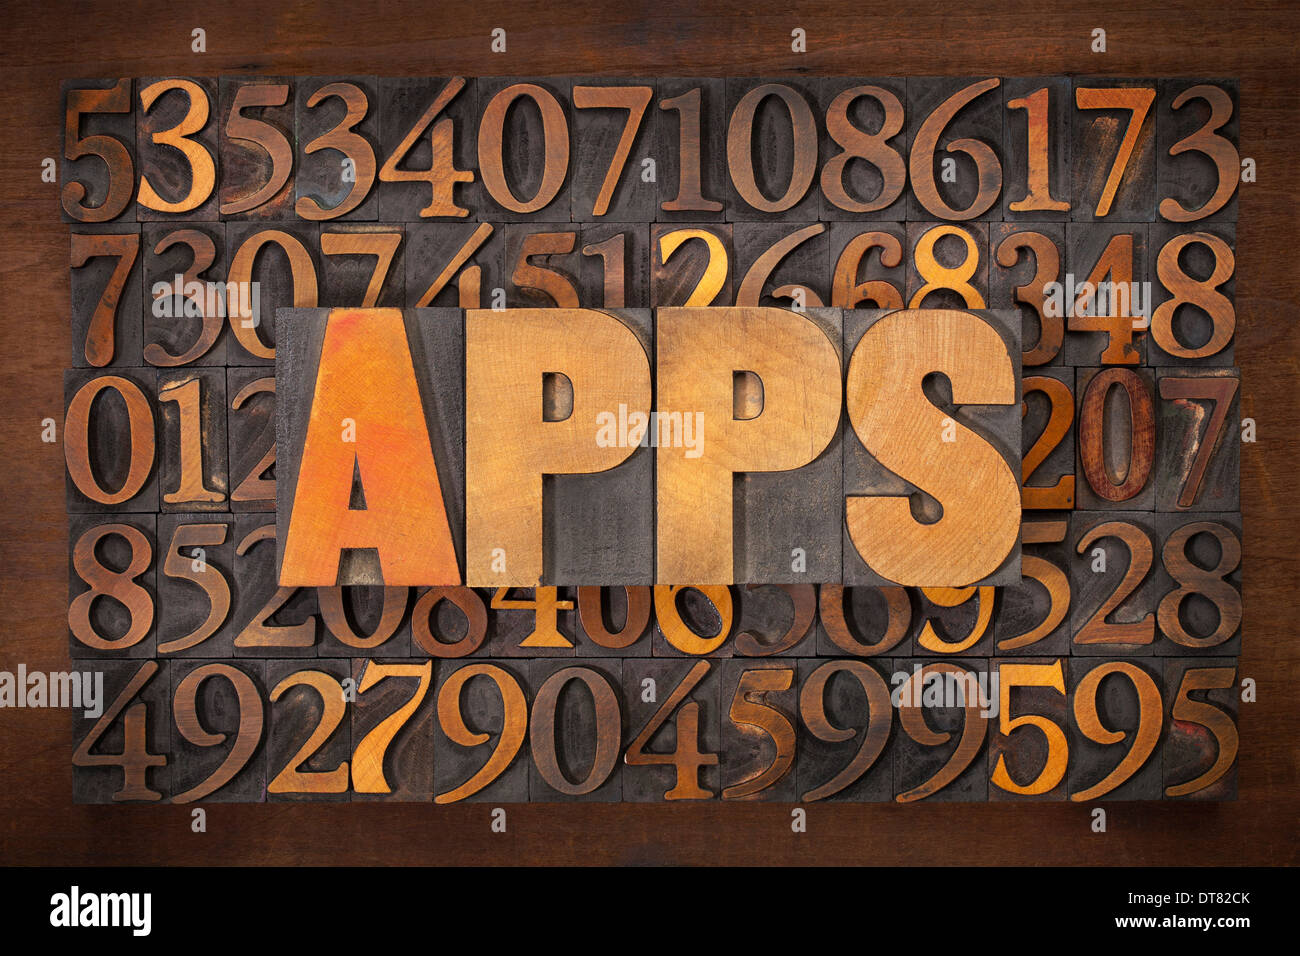 apps (applications) word in vintage letterpress wood type against number background - software concept Stock Photo